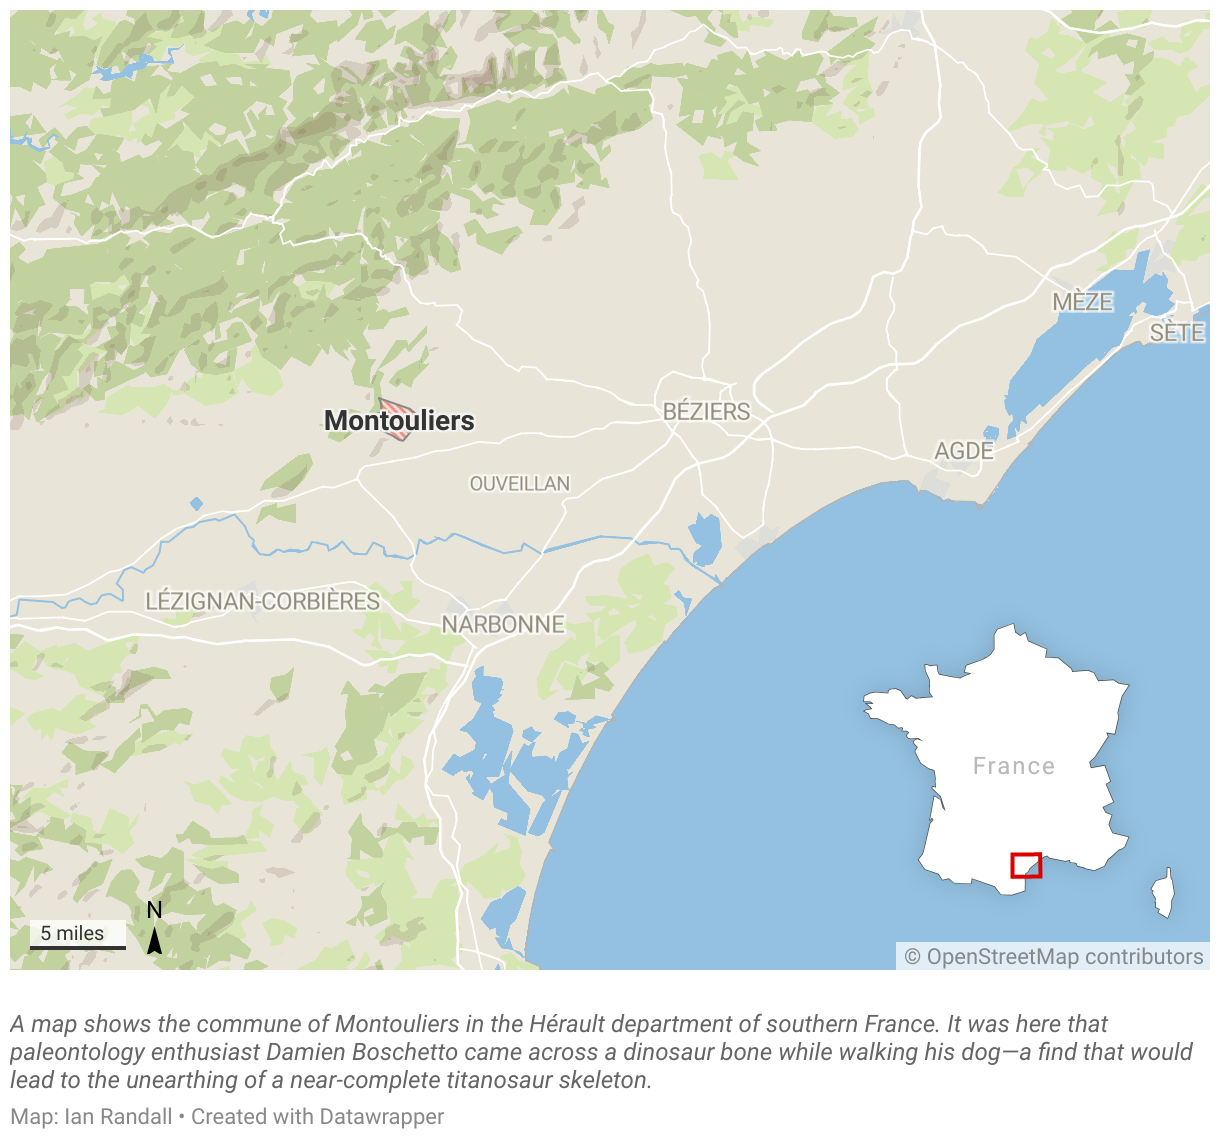 A map shows the commune of Montouliers in the Hérault department of southern France.